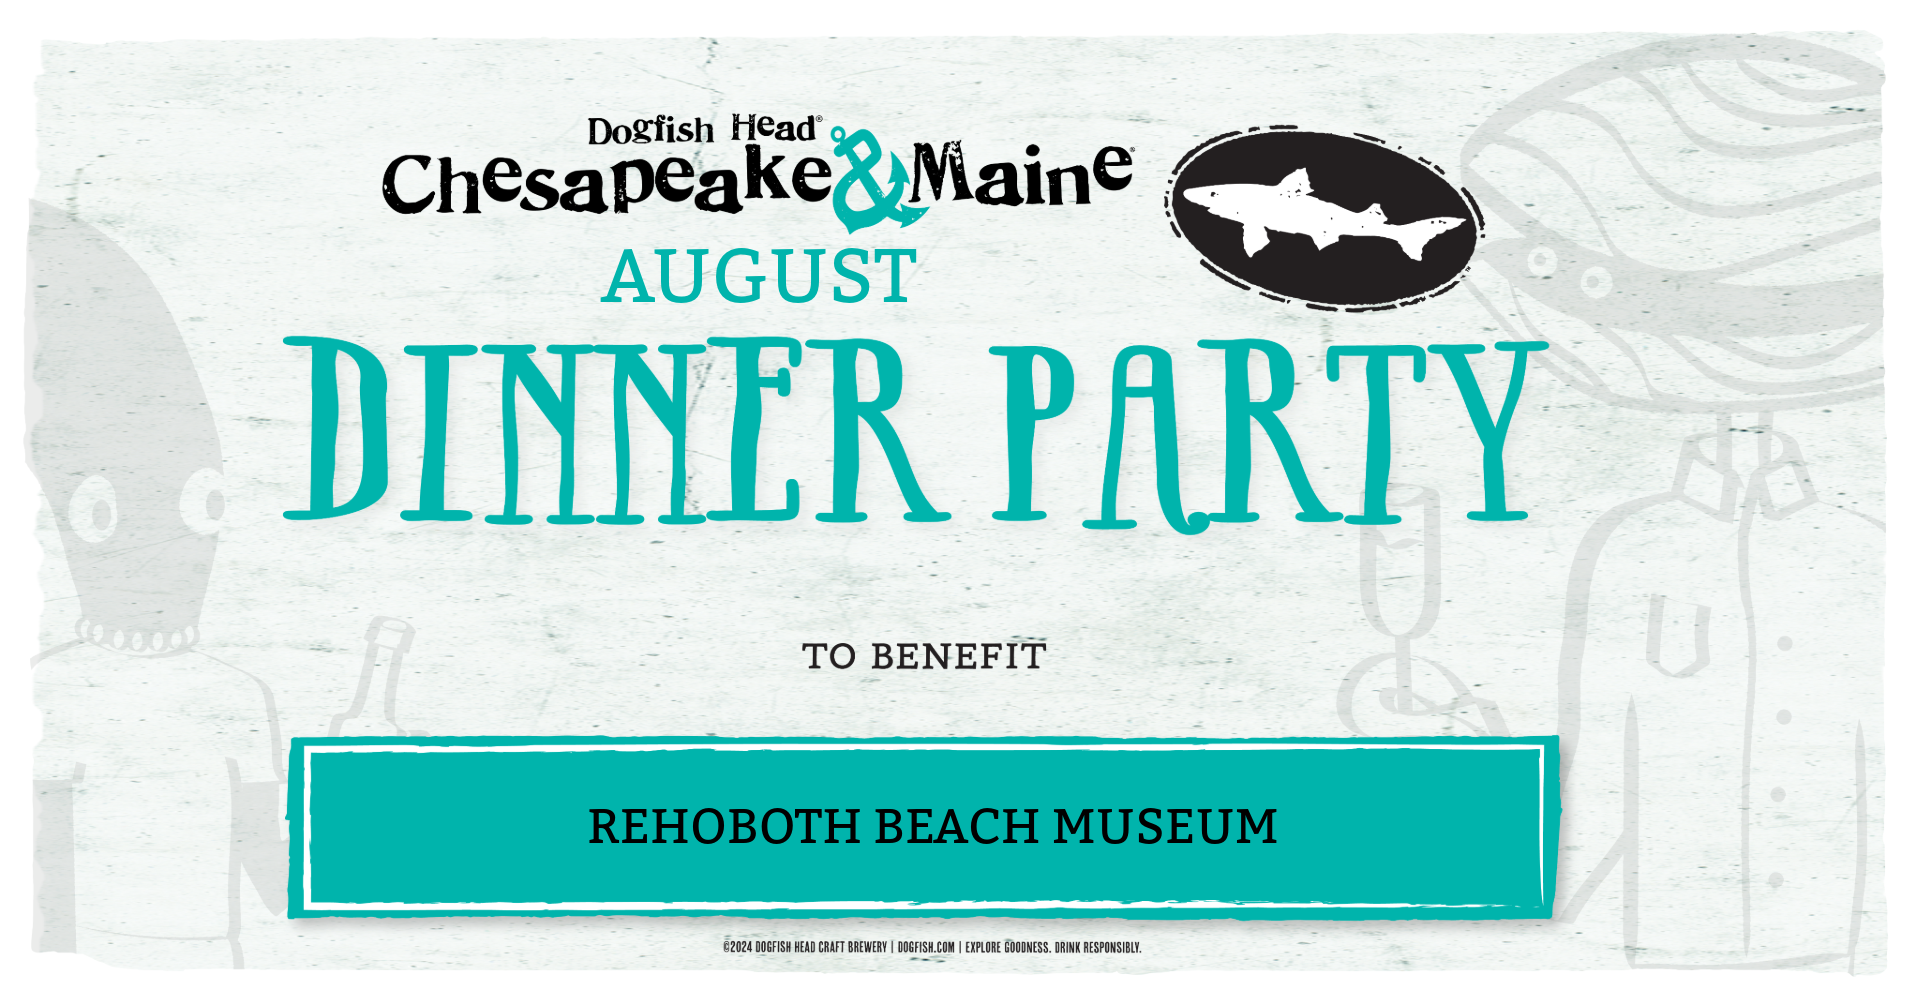 gray background with cartoon illustration of seafood with turquoise text about an August dinner party at Chesapeake & Maine benefiting the Rehoboth Beach Museum